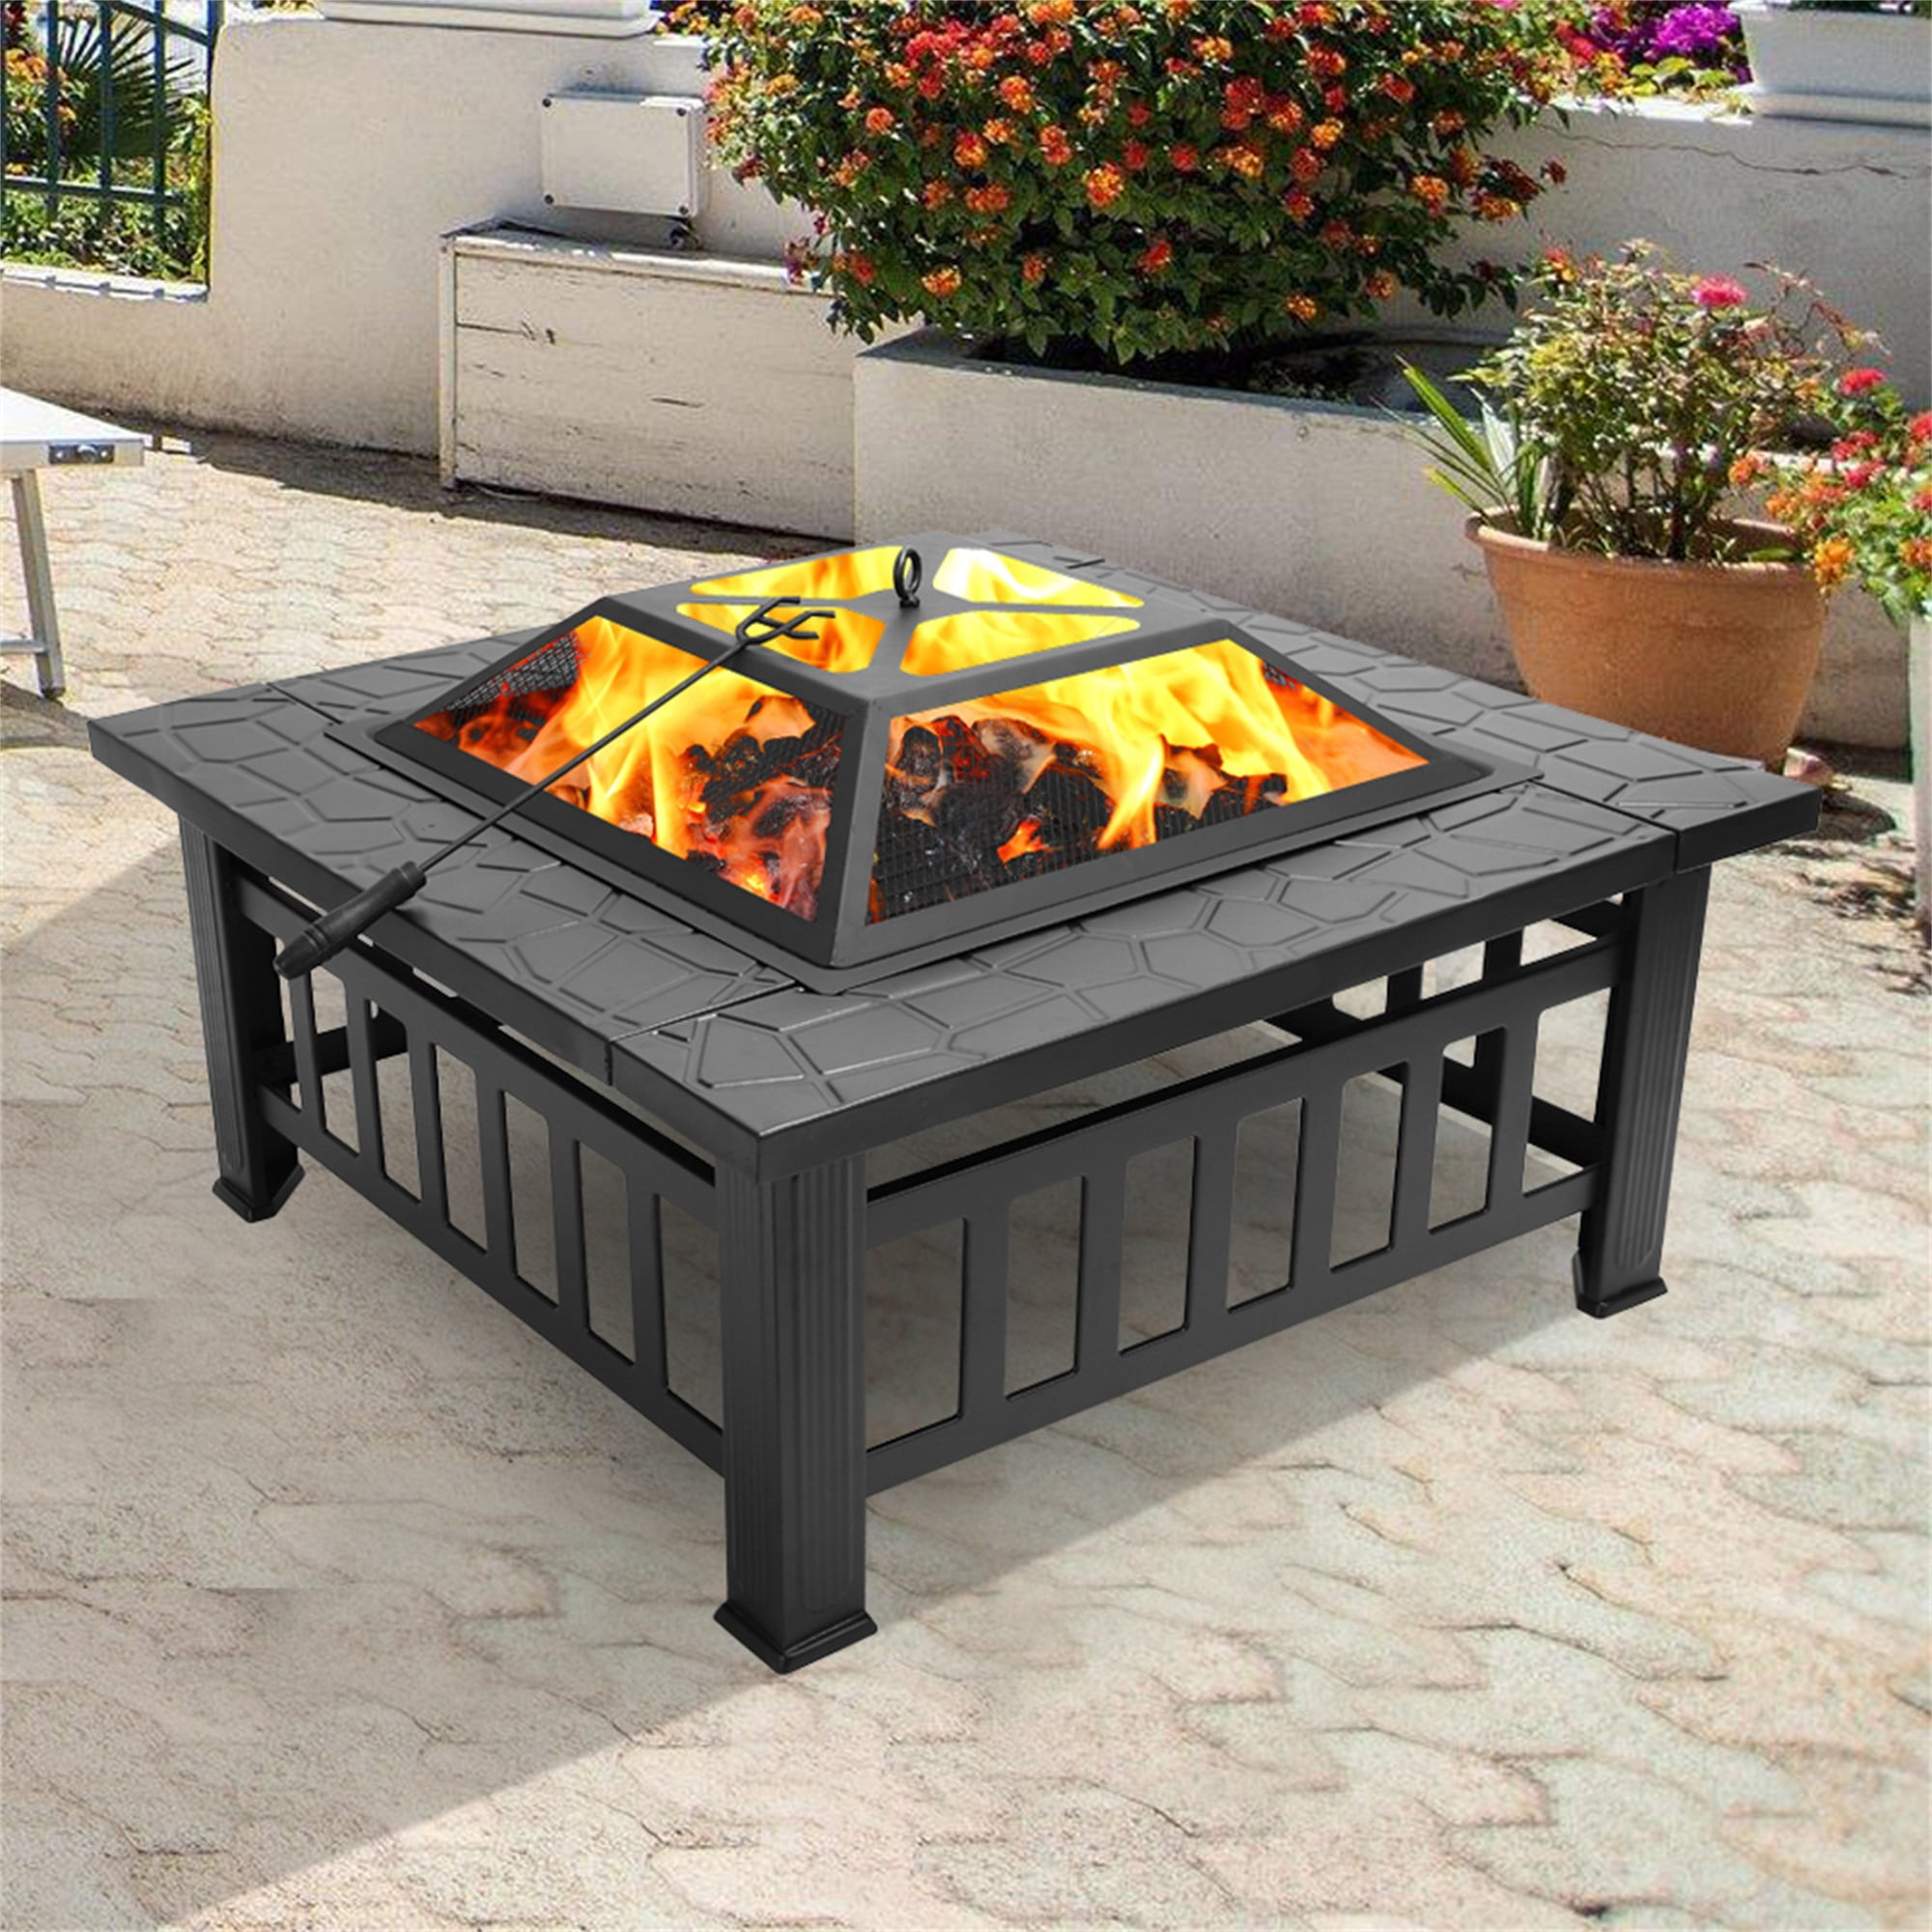 Permalink to Square Fire Pit Bowl Replacement